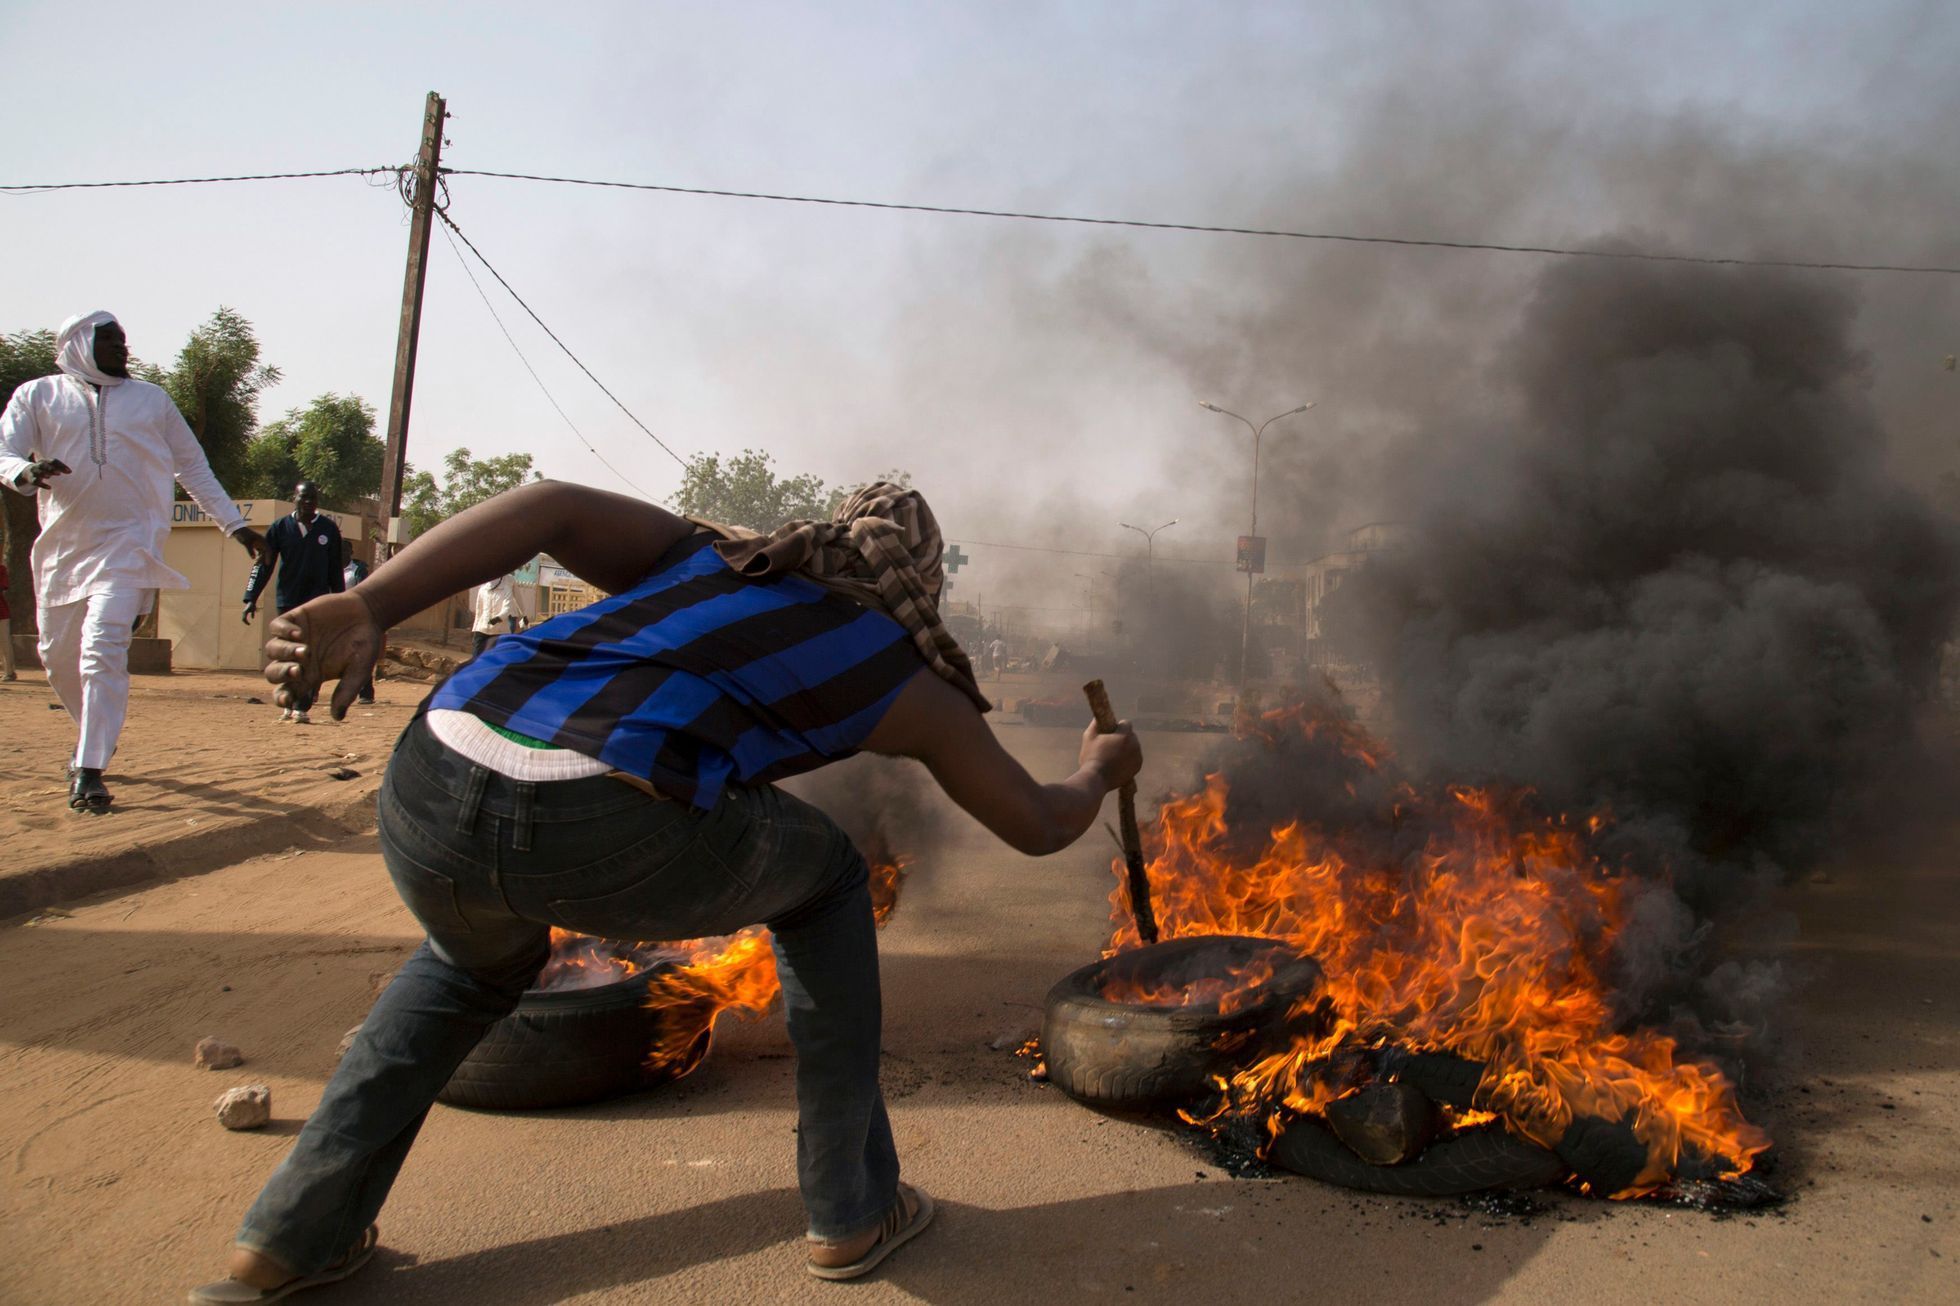 A man burns a tire during a protest against Niger President Issoufou's attendance last week at a Paris rally in support of French satirical weekly Charlie Hebdo, in Niamey